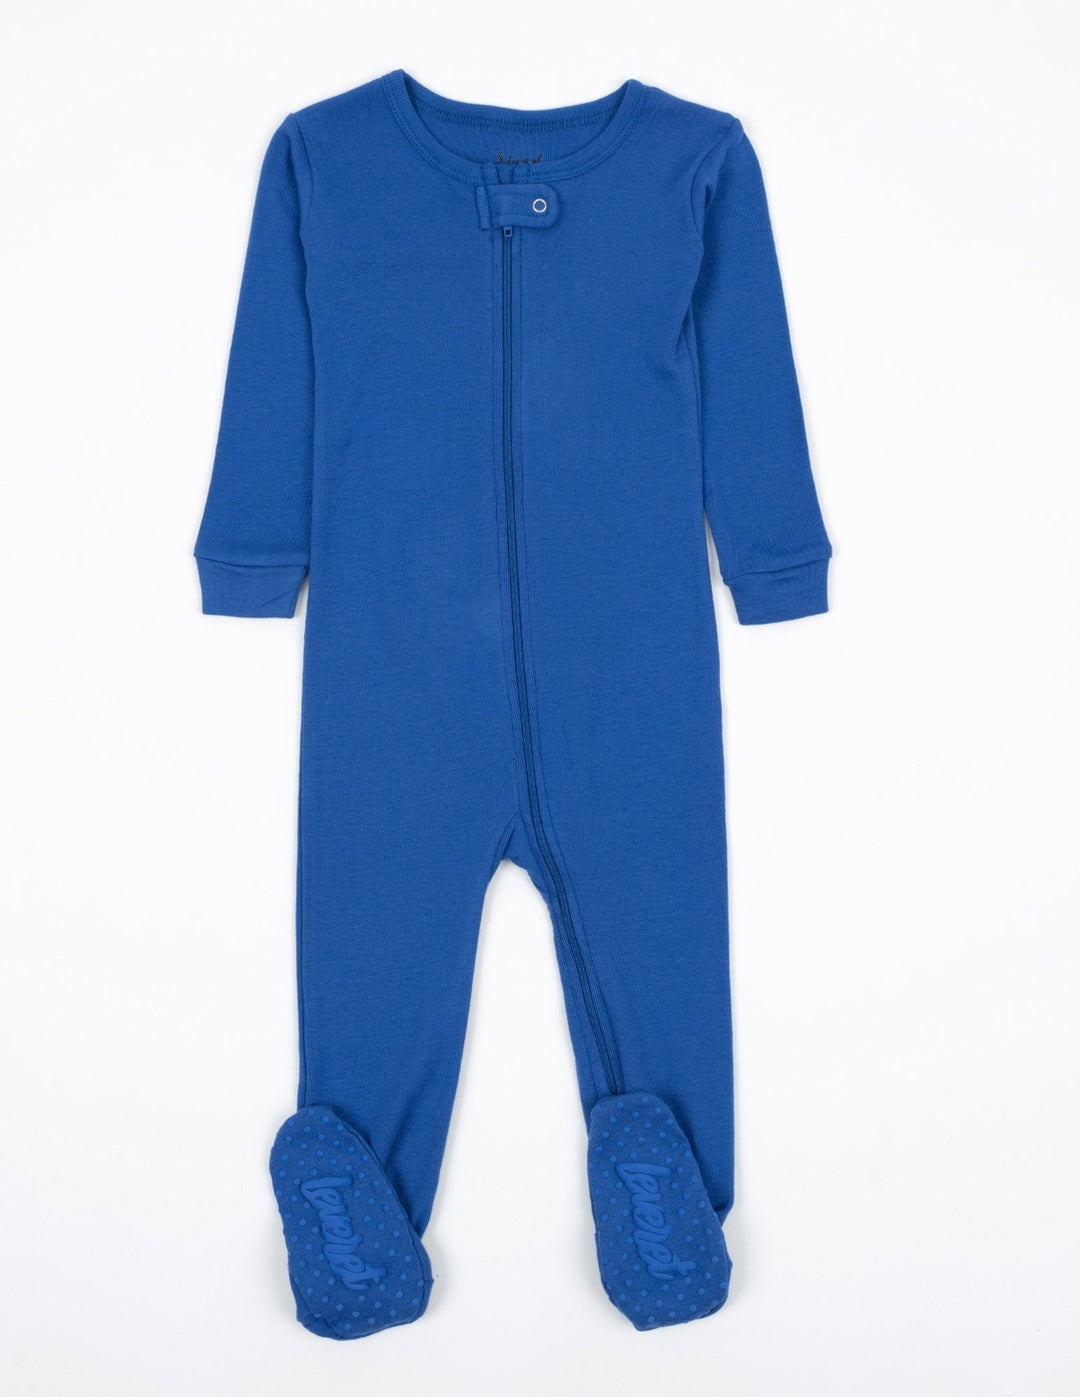 solid color royal blue baby footed pajamas